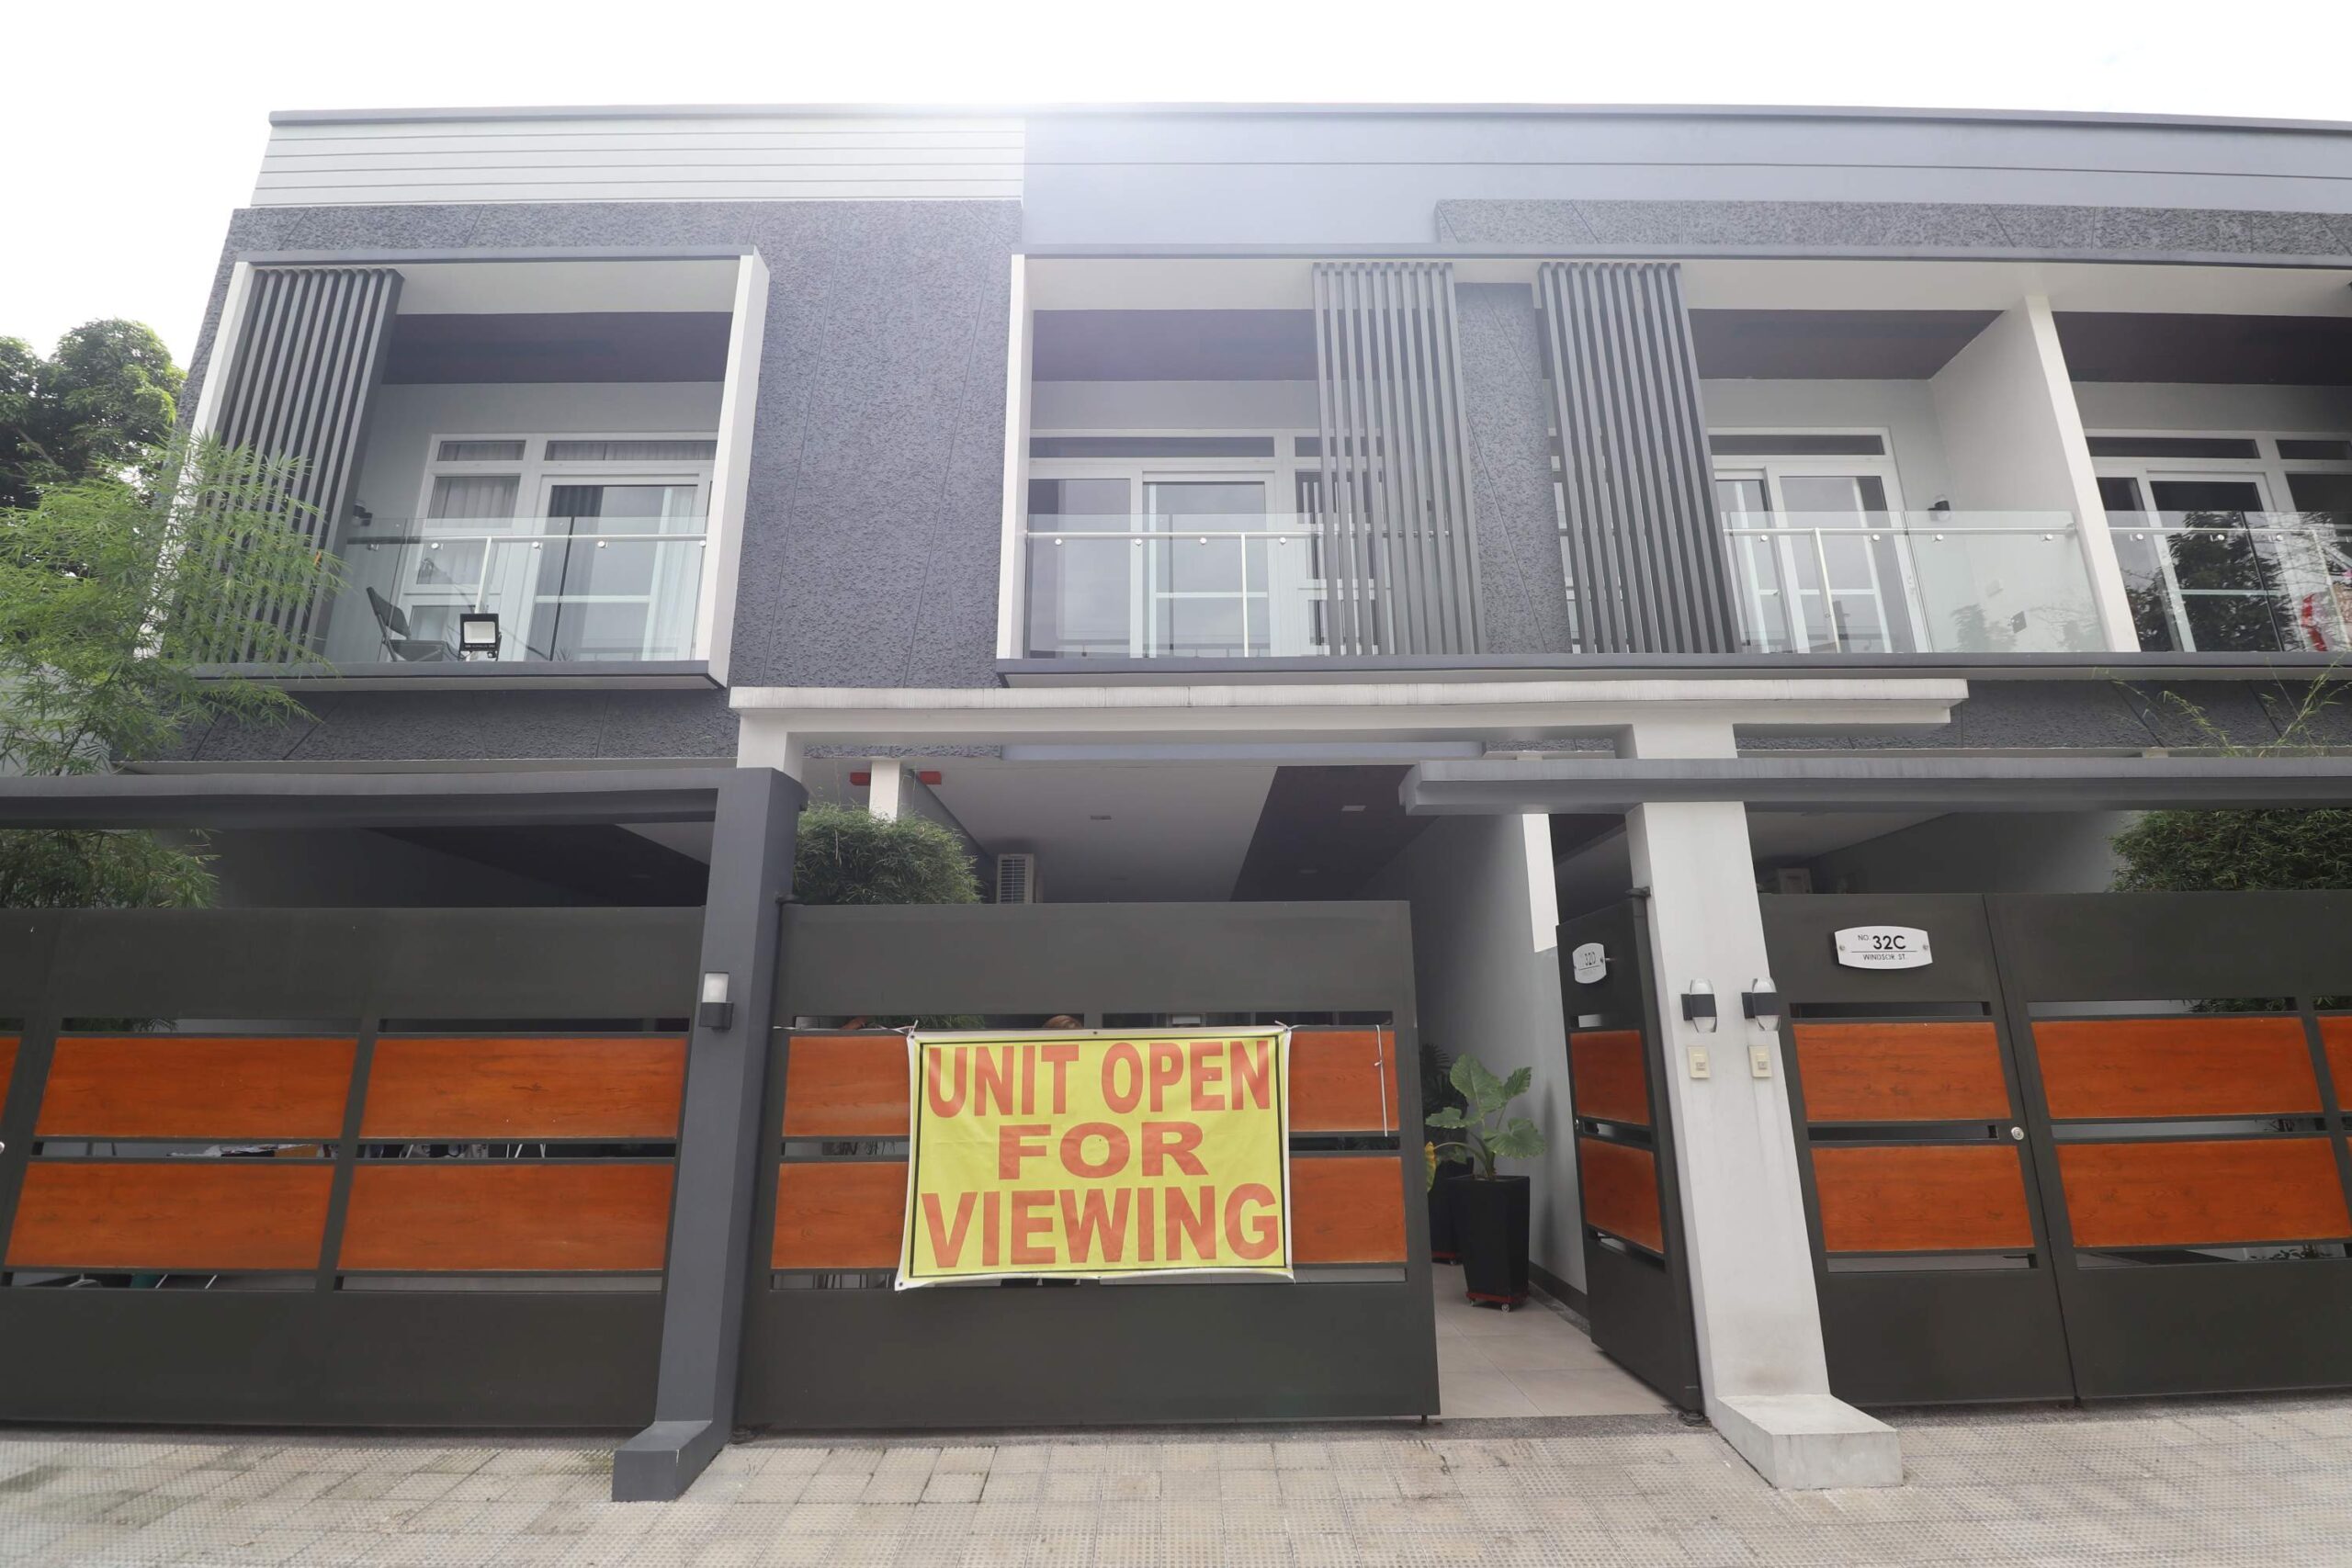 2 Storey Townhouse For sale with 3 Bedroom and 2 Car Garage in Fairview Quezon City PH2889